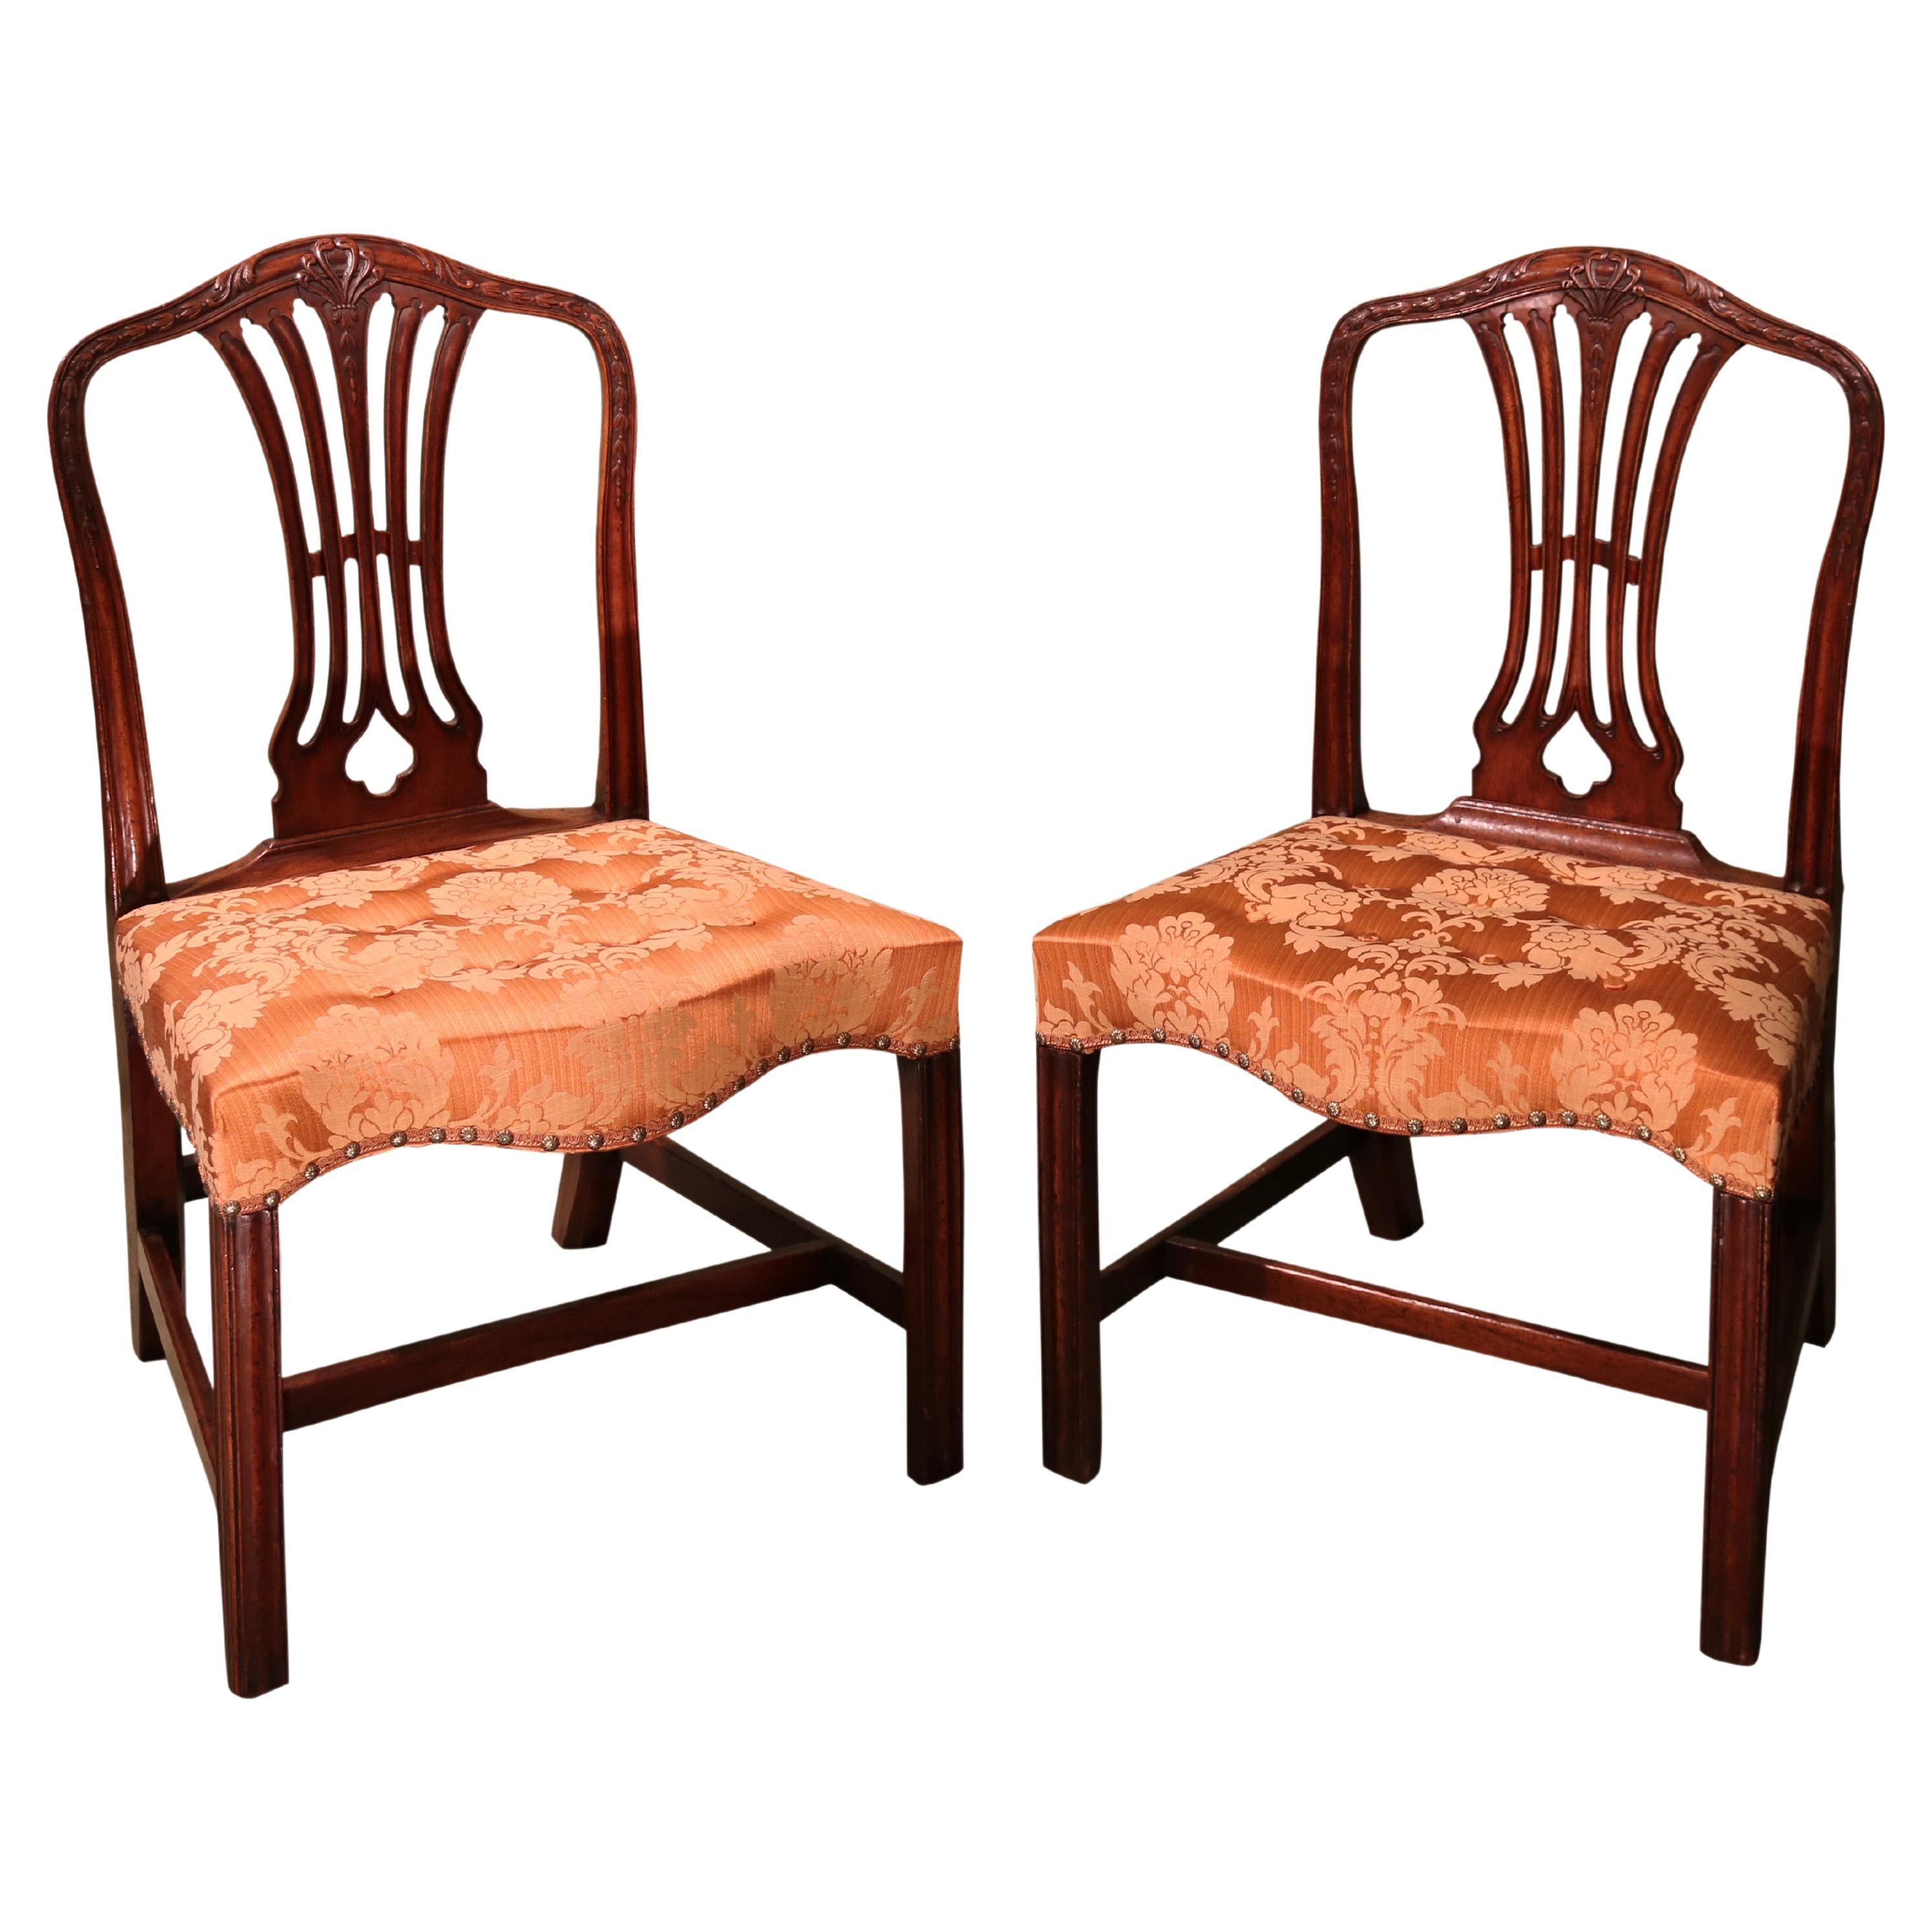 Pair of Hepplewhite Period Mahogany Single Chairs For Sale